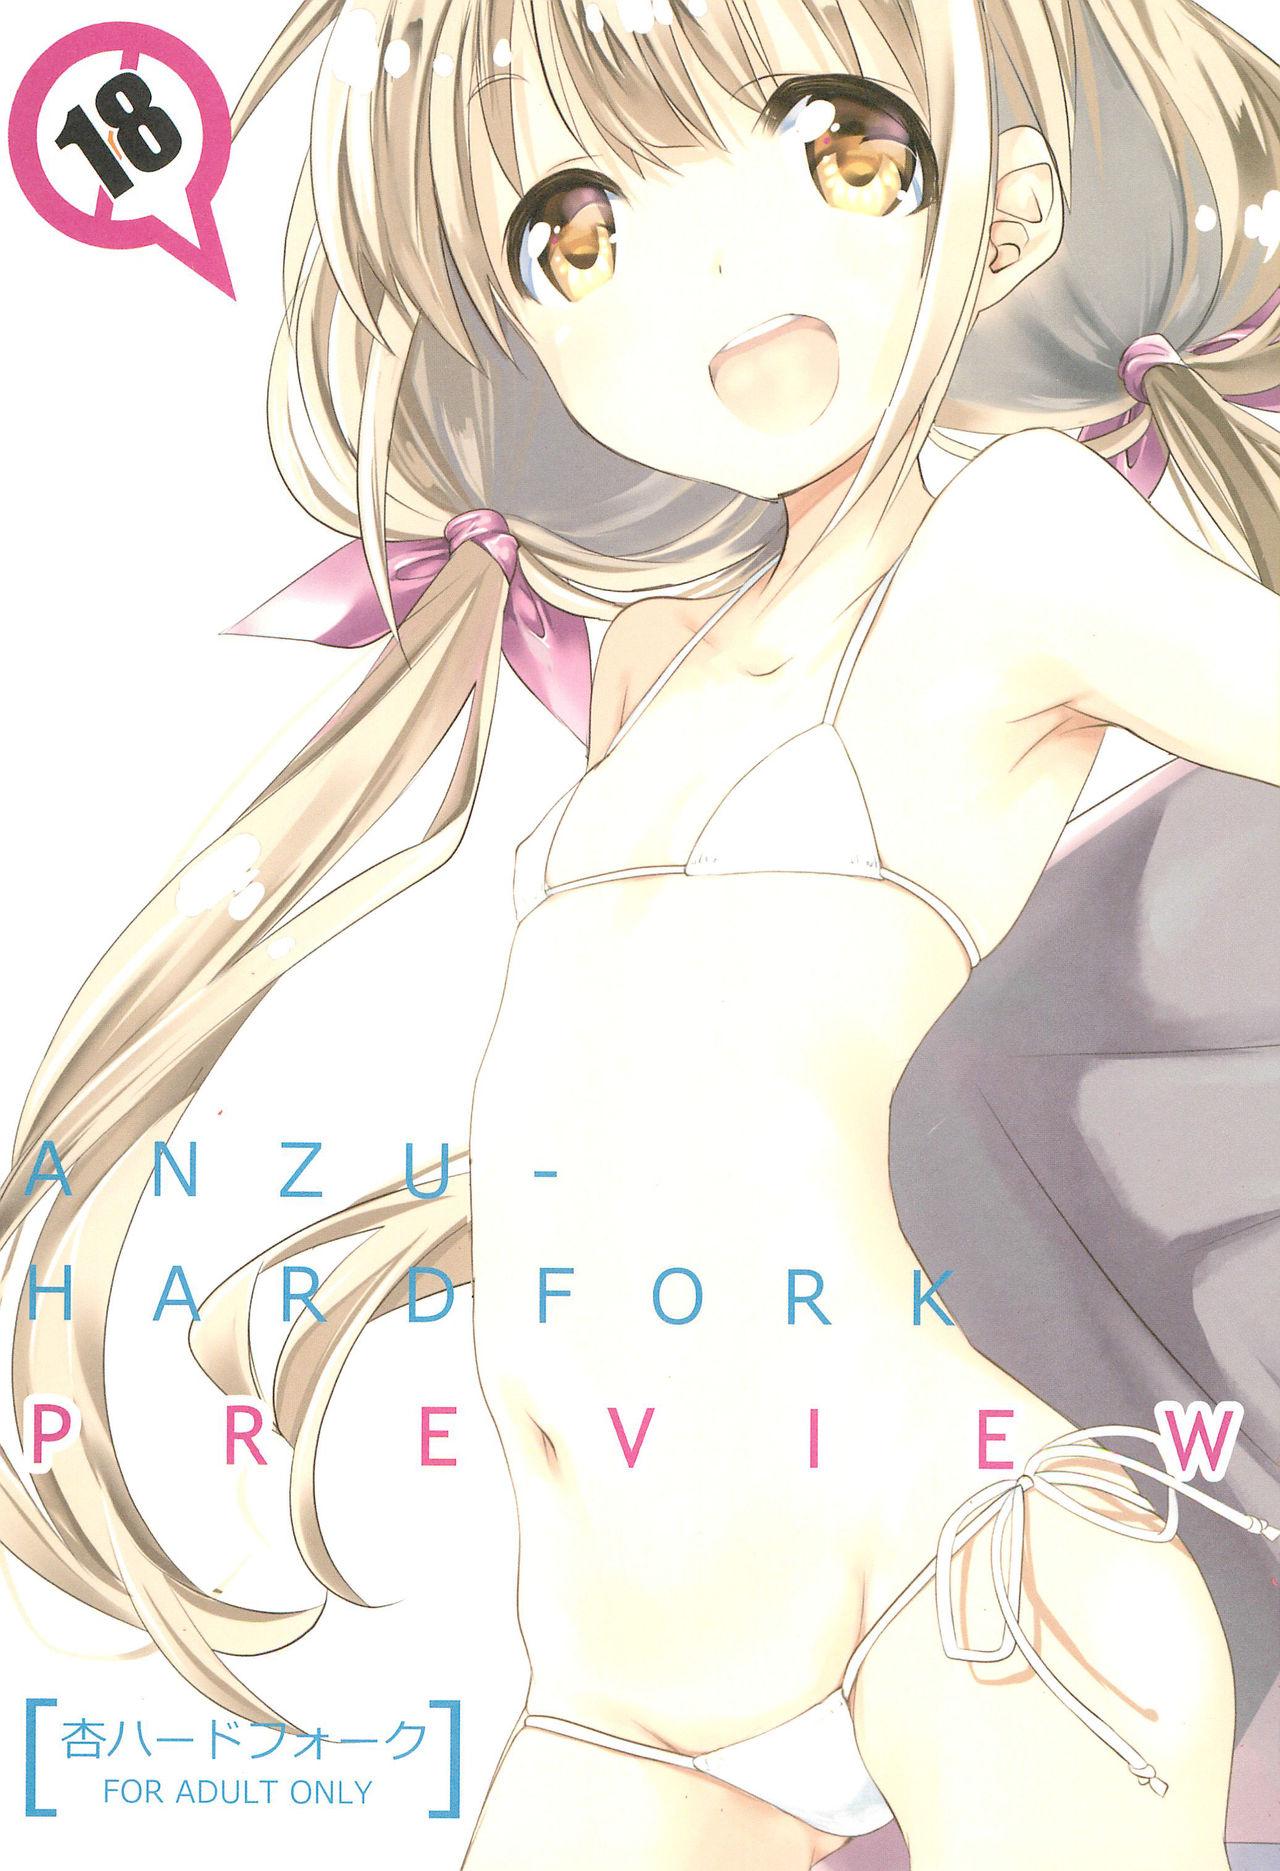 Hot Pussy Anzu Hard Fork PREVIEW - The idolmaster Beard - Picture 1